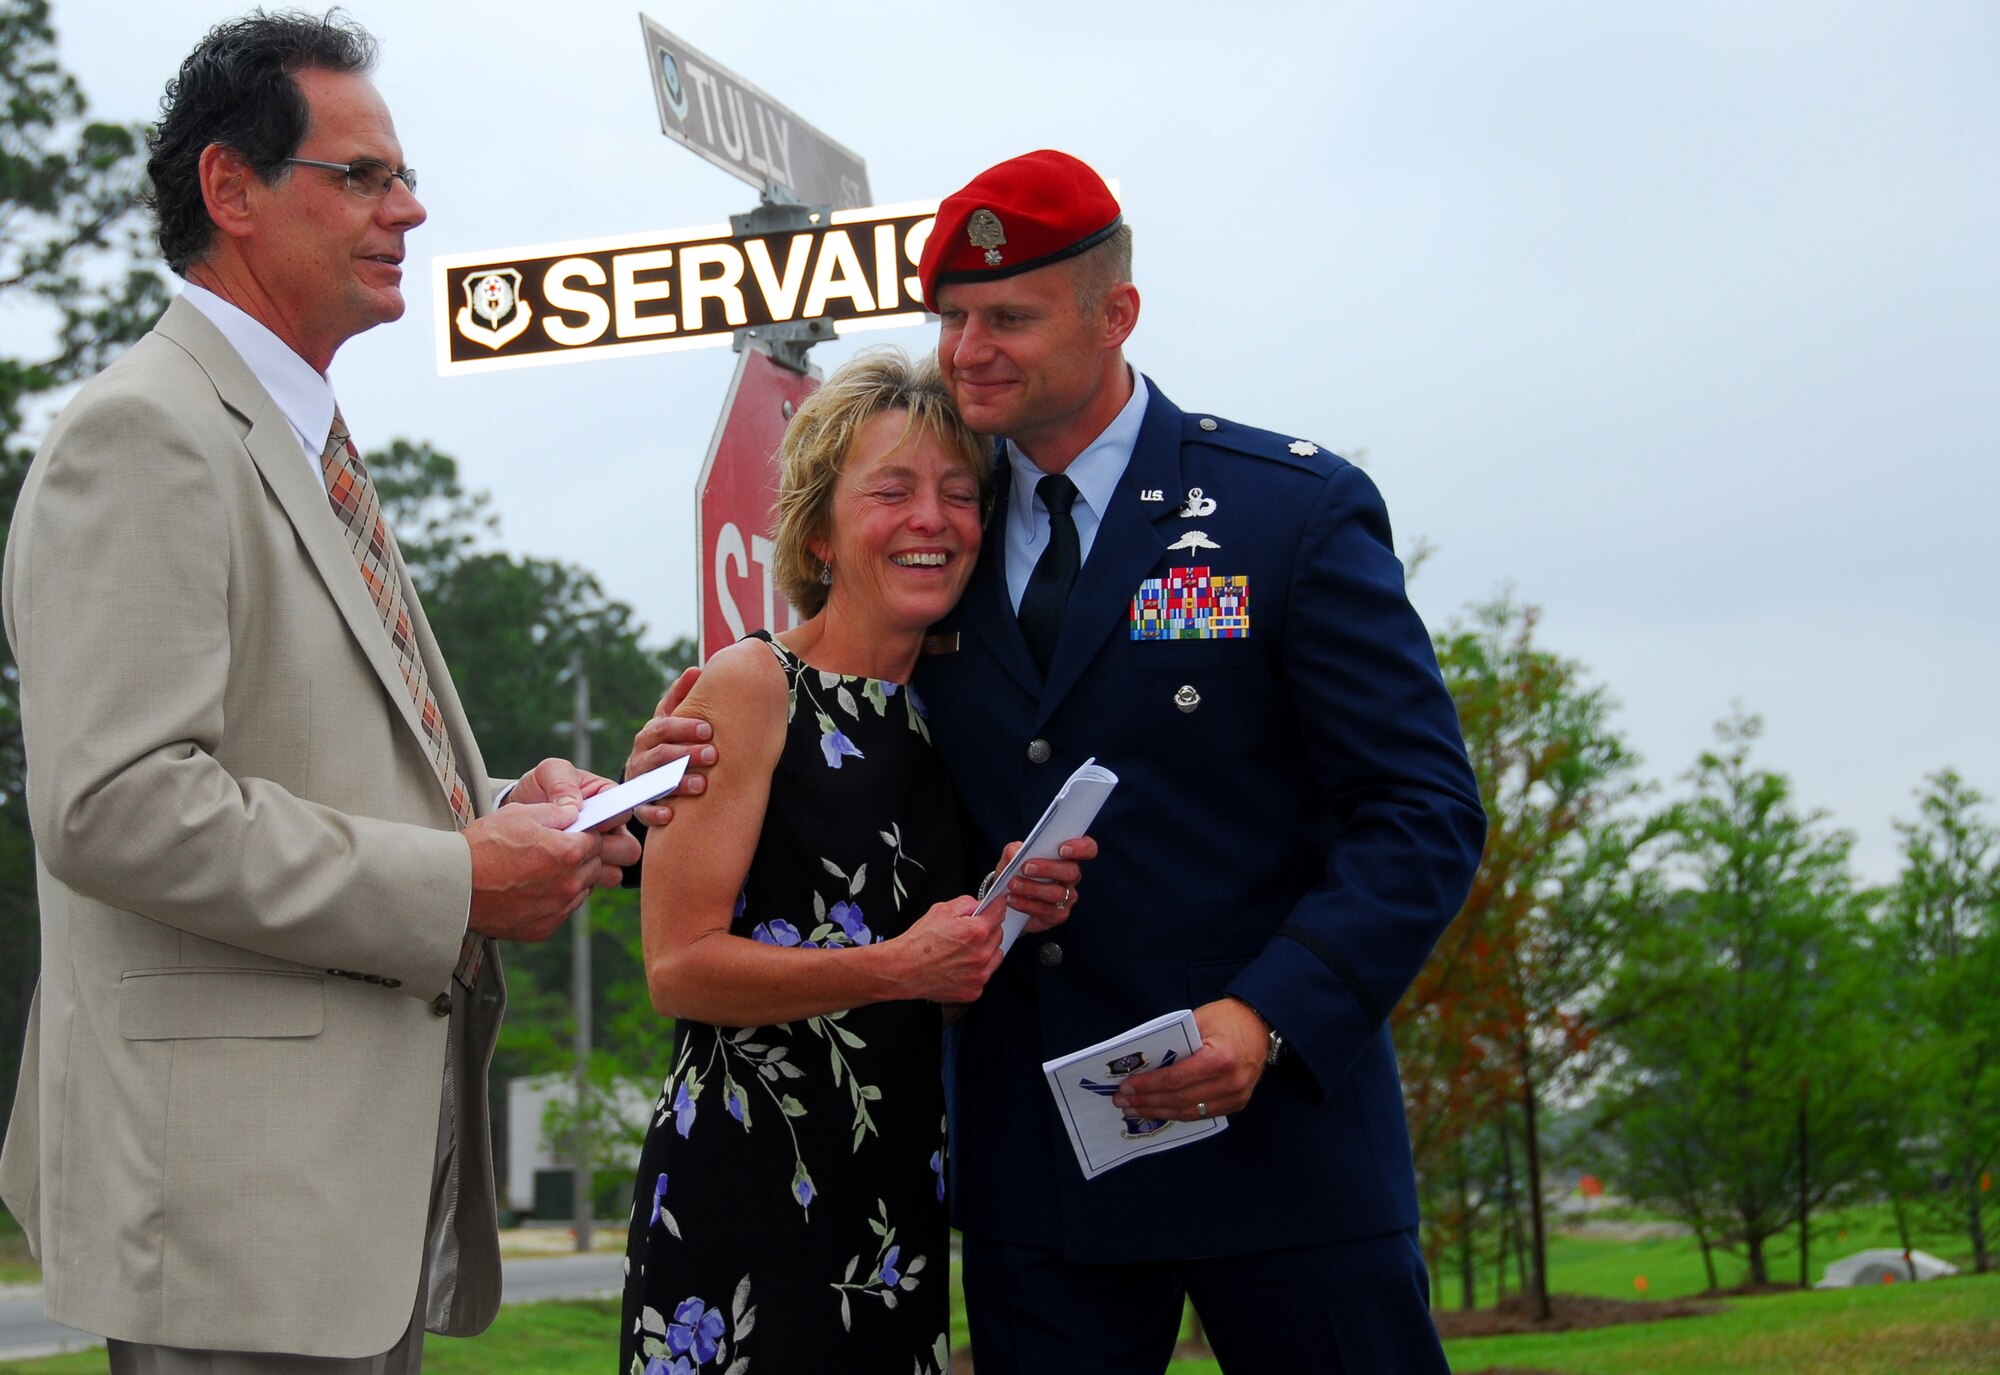 Sue Servais, mother of fallen Air Force combat controller Senior Airman Adam Servais, embraces Lt. Col. Eric Ray, commander of the 23rd Special Tactics Squadron, during a street-naming ceremony at Hurlburt Field, May 30, 2007.  Airman Servais' father, Peter, looks on.  Airman Servais was killed in a firefight in Afghanistan in August, 2006.  (US Air Force photo by Chief Master Sgt. Gary Emery) (Released)  